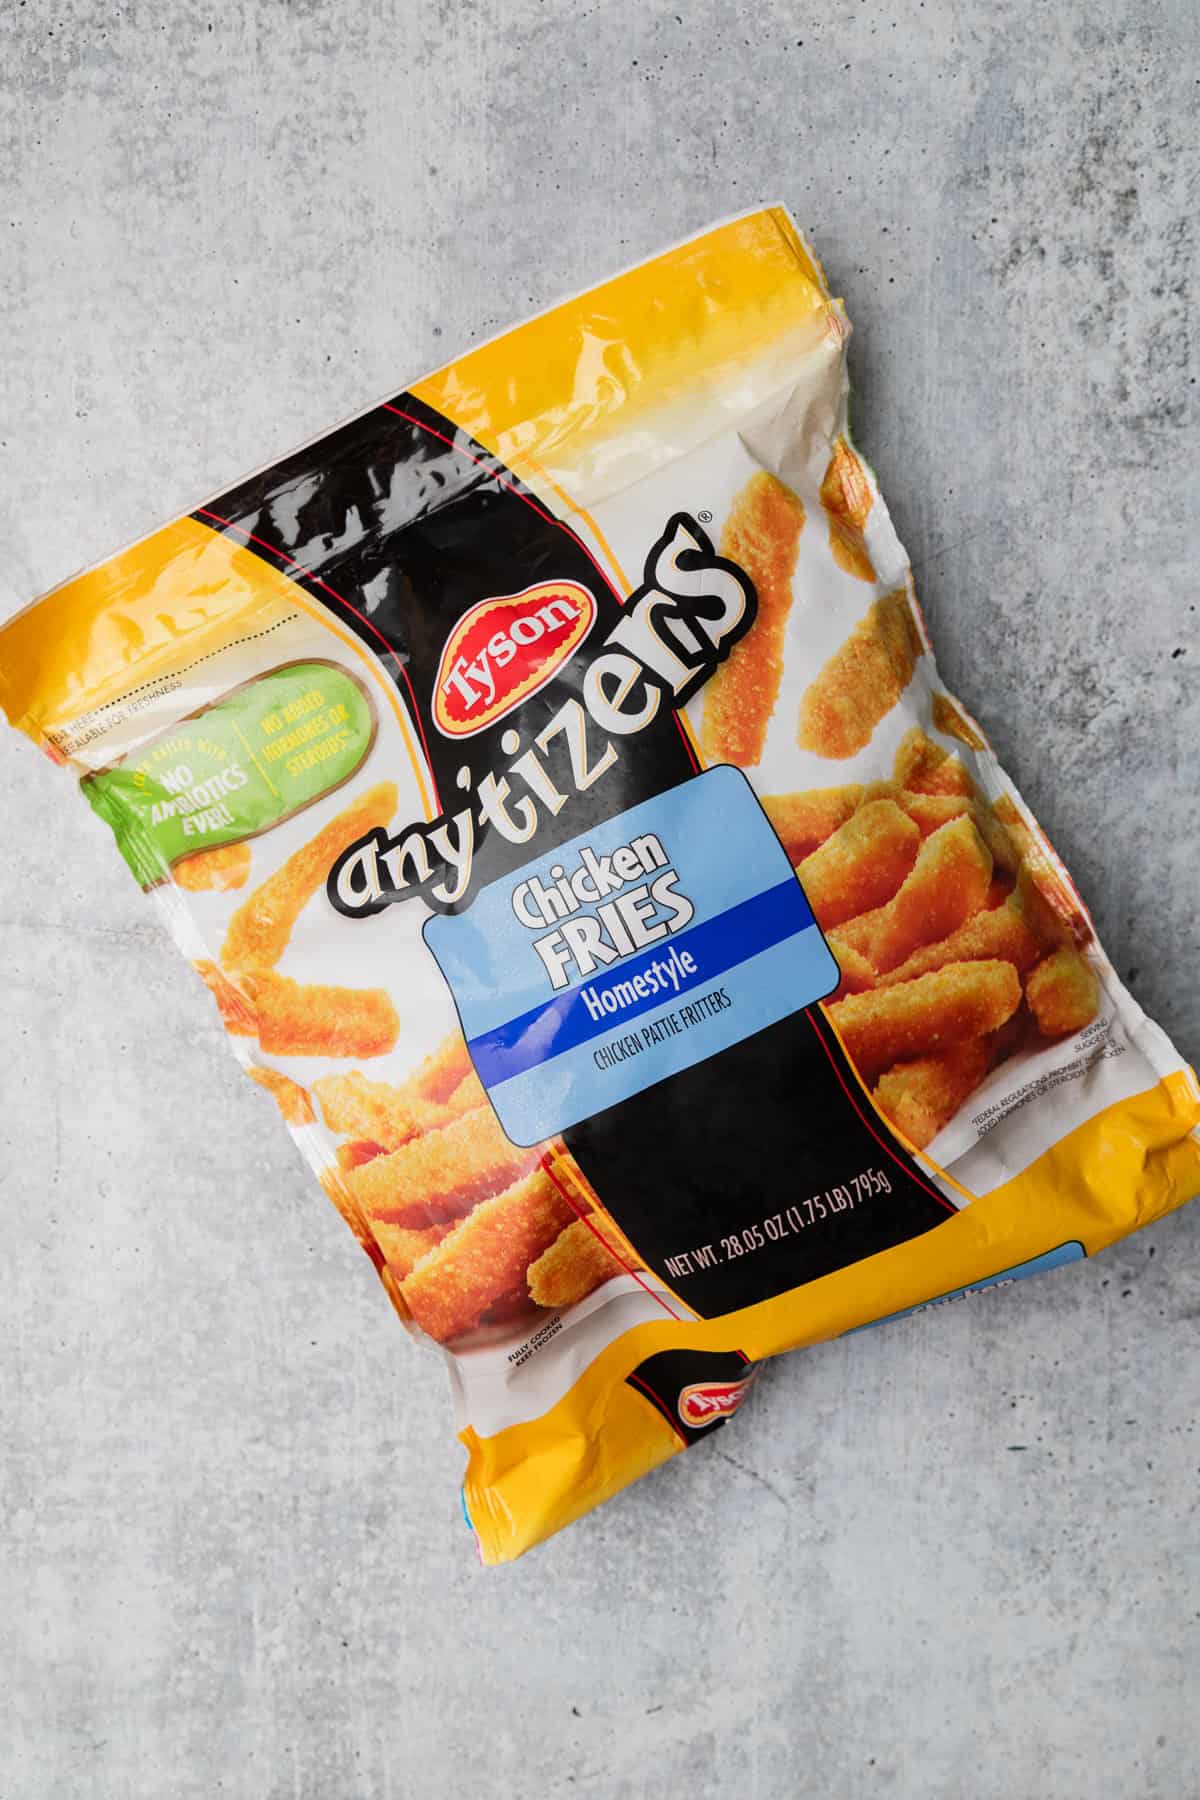 A bag on tyson anytizers chicken fries.